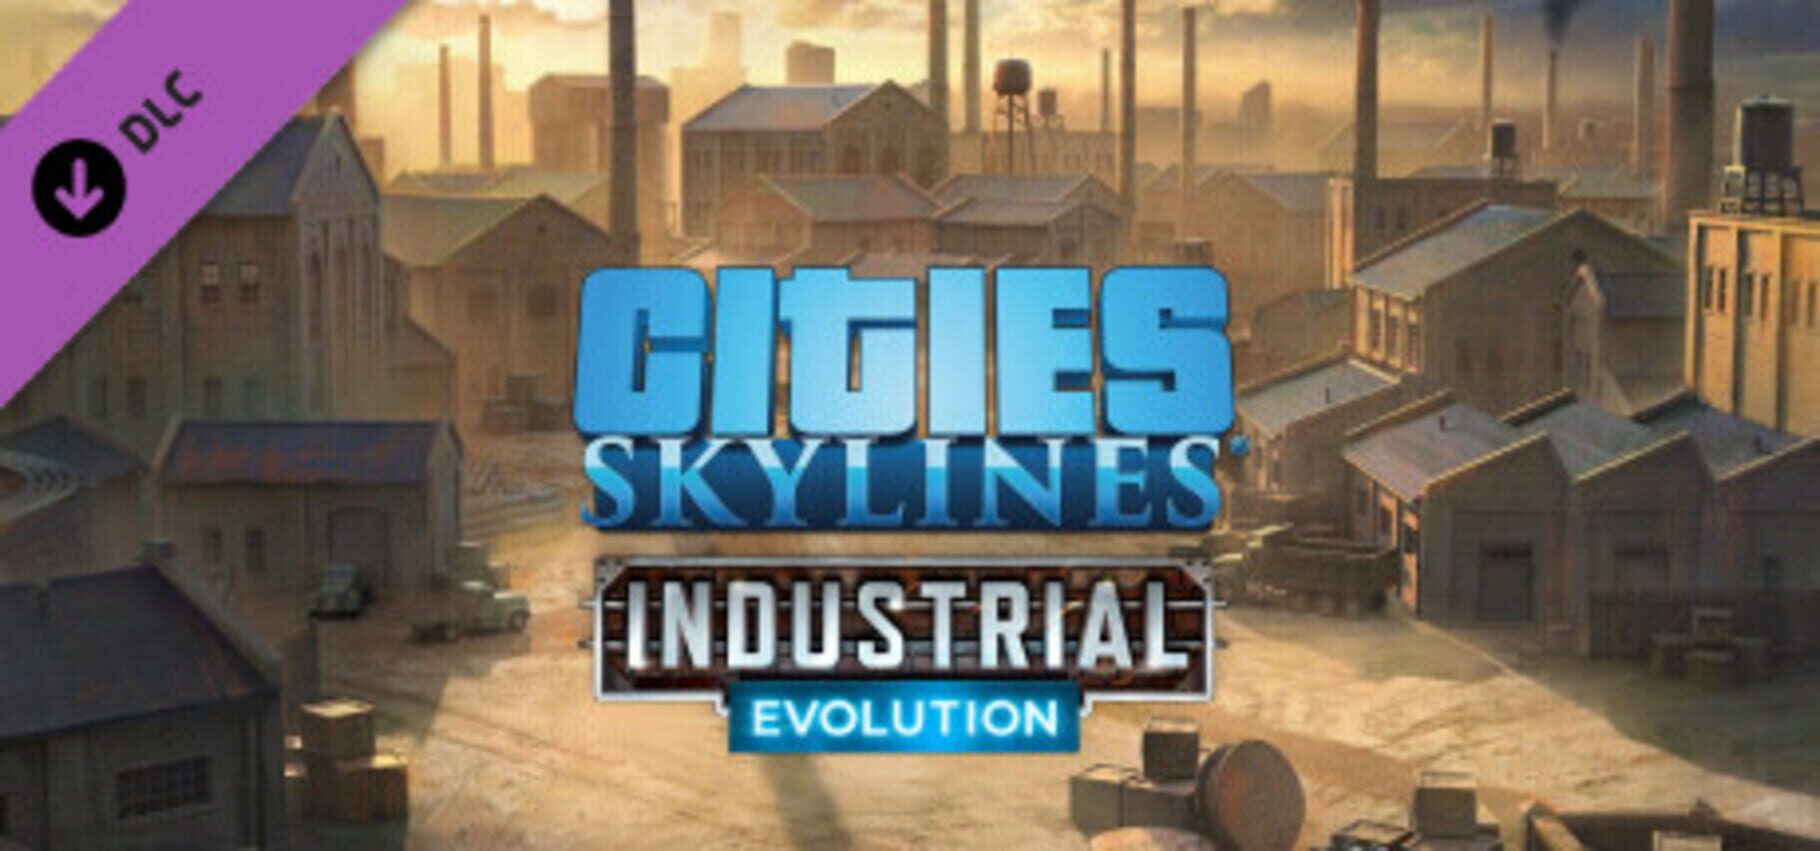 Cities: Skylines - Content Creator Pack: Industrial Evolution featured image